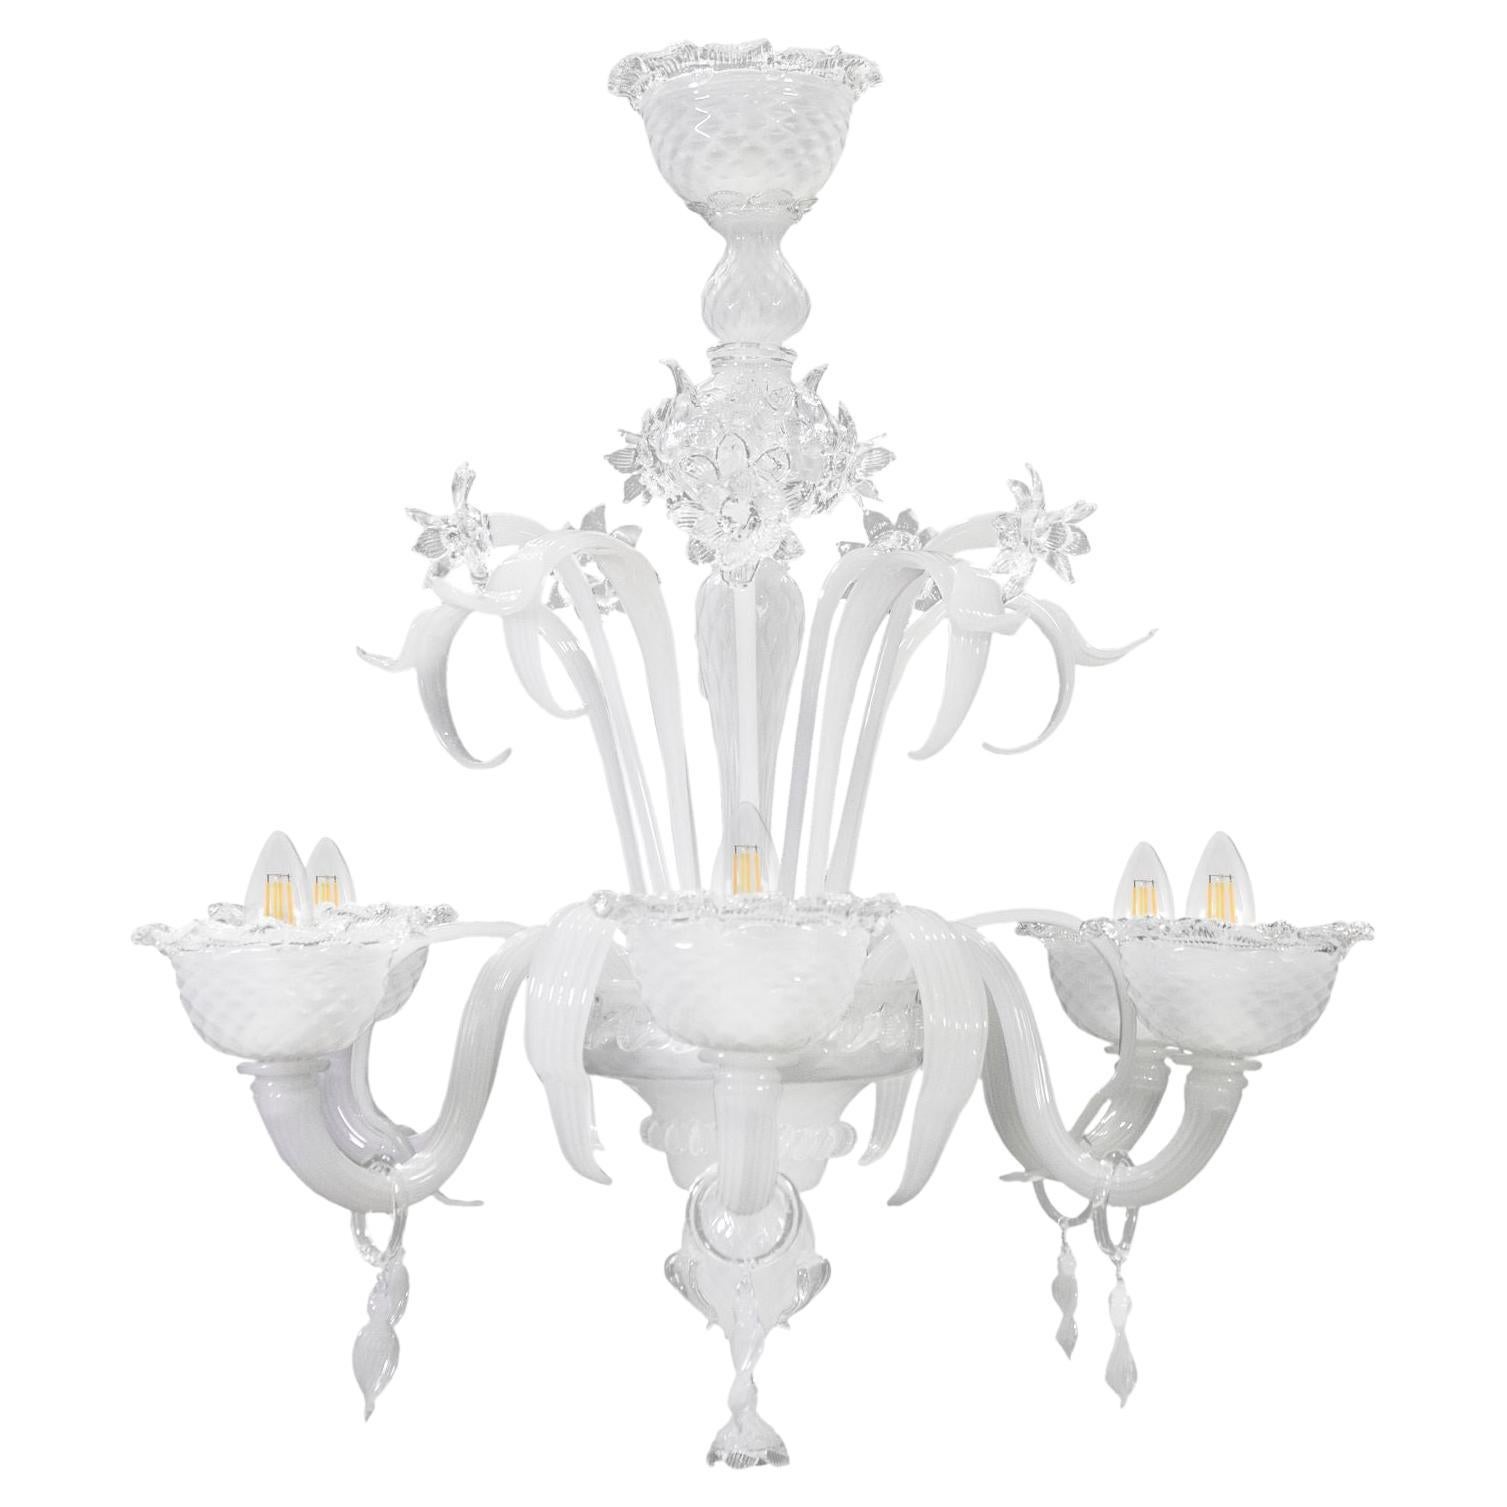 Artistic Chandelier 6 Arms White Murano Glass Clear Details by Multiforme For Sale